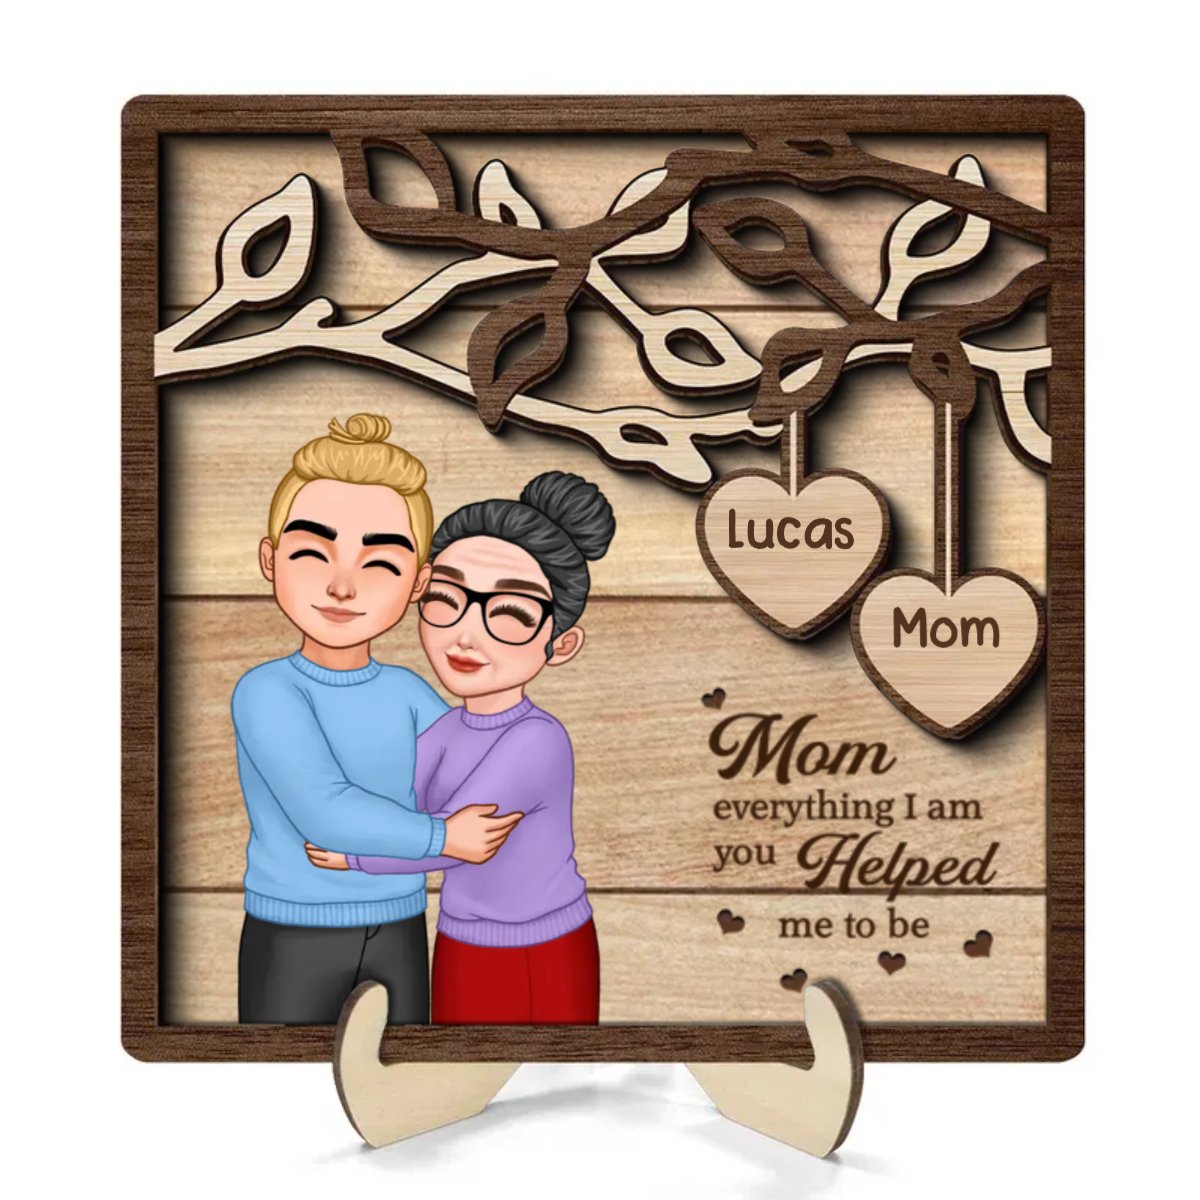 Family - Mom Hugging Daughter Son Under Tree - Personalized Wooden Plaque - The Next Custom Gift